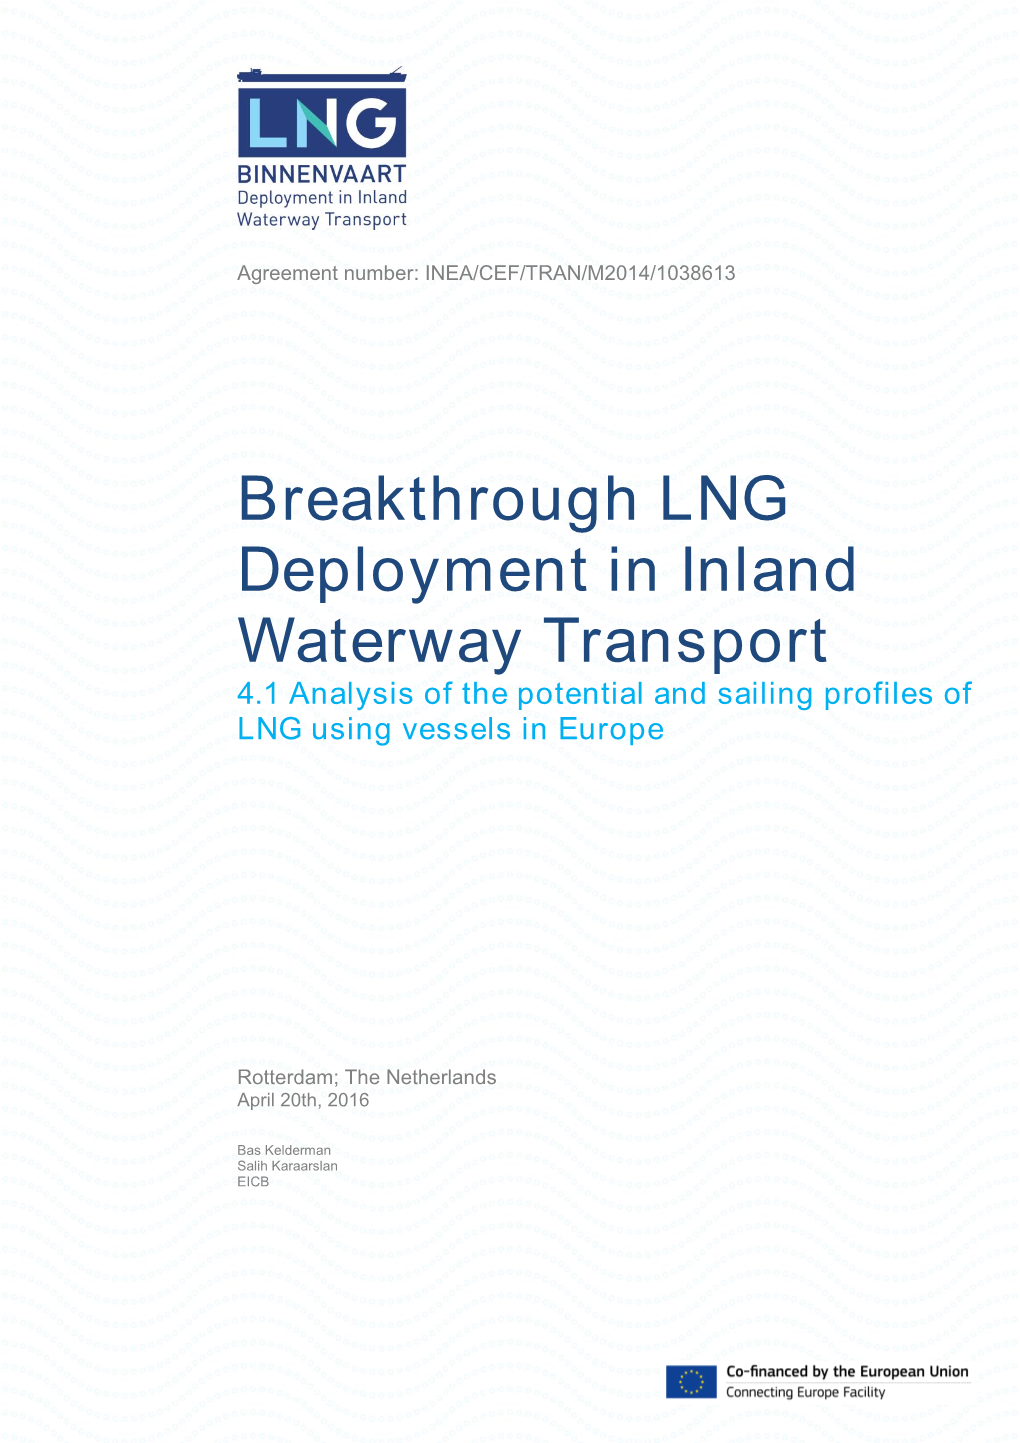 Breakthrough LNG Deployment in Inland Waterway Transport 4.1 Analysis of the Potential and Sailing Profiles of LNG Using Vessels in Europe